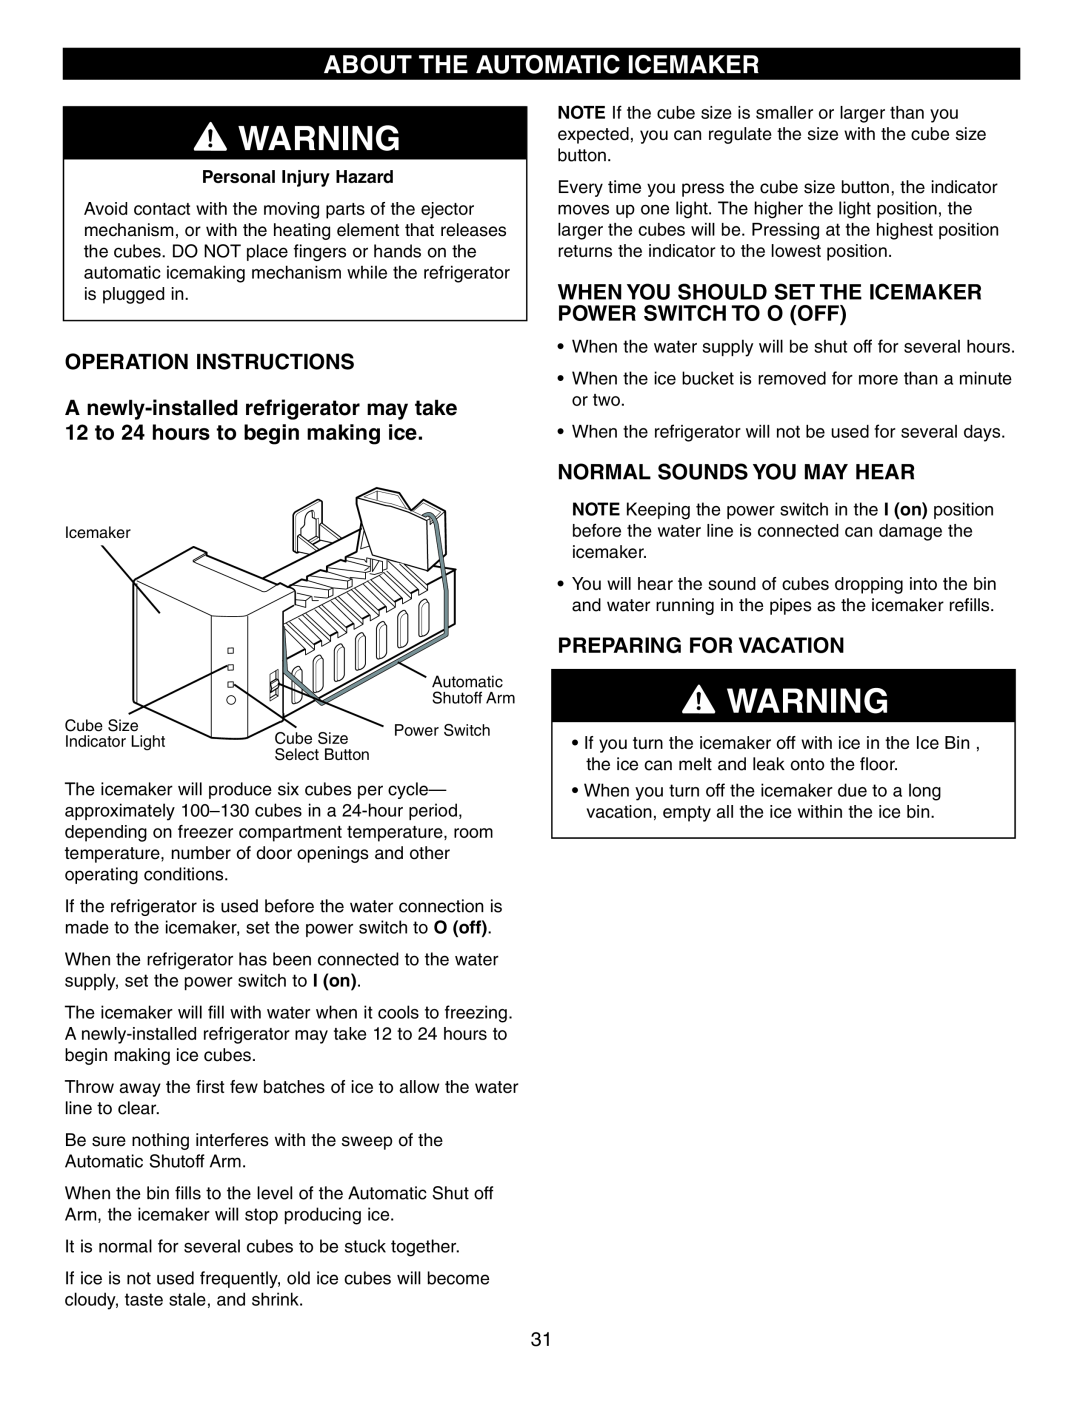 LG Electronics LFX25950 manual About The Automatic Icemaker, Operation Instructions, Normal Sounds You May Hear 